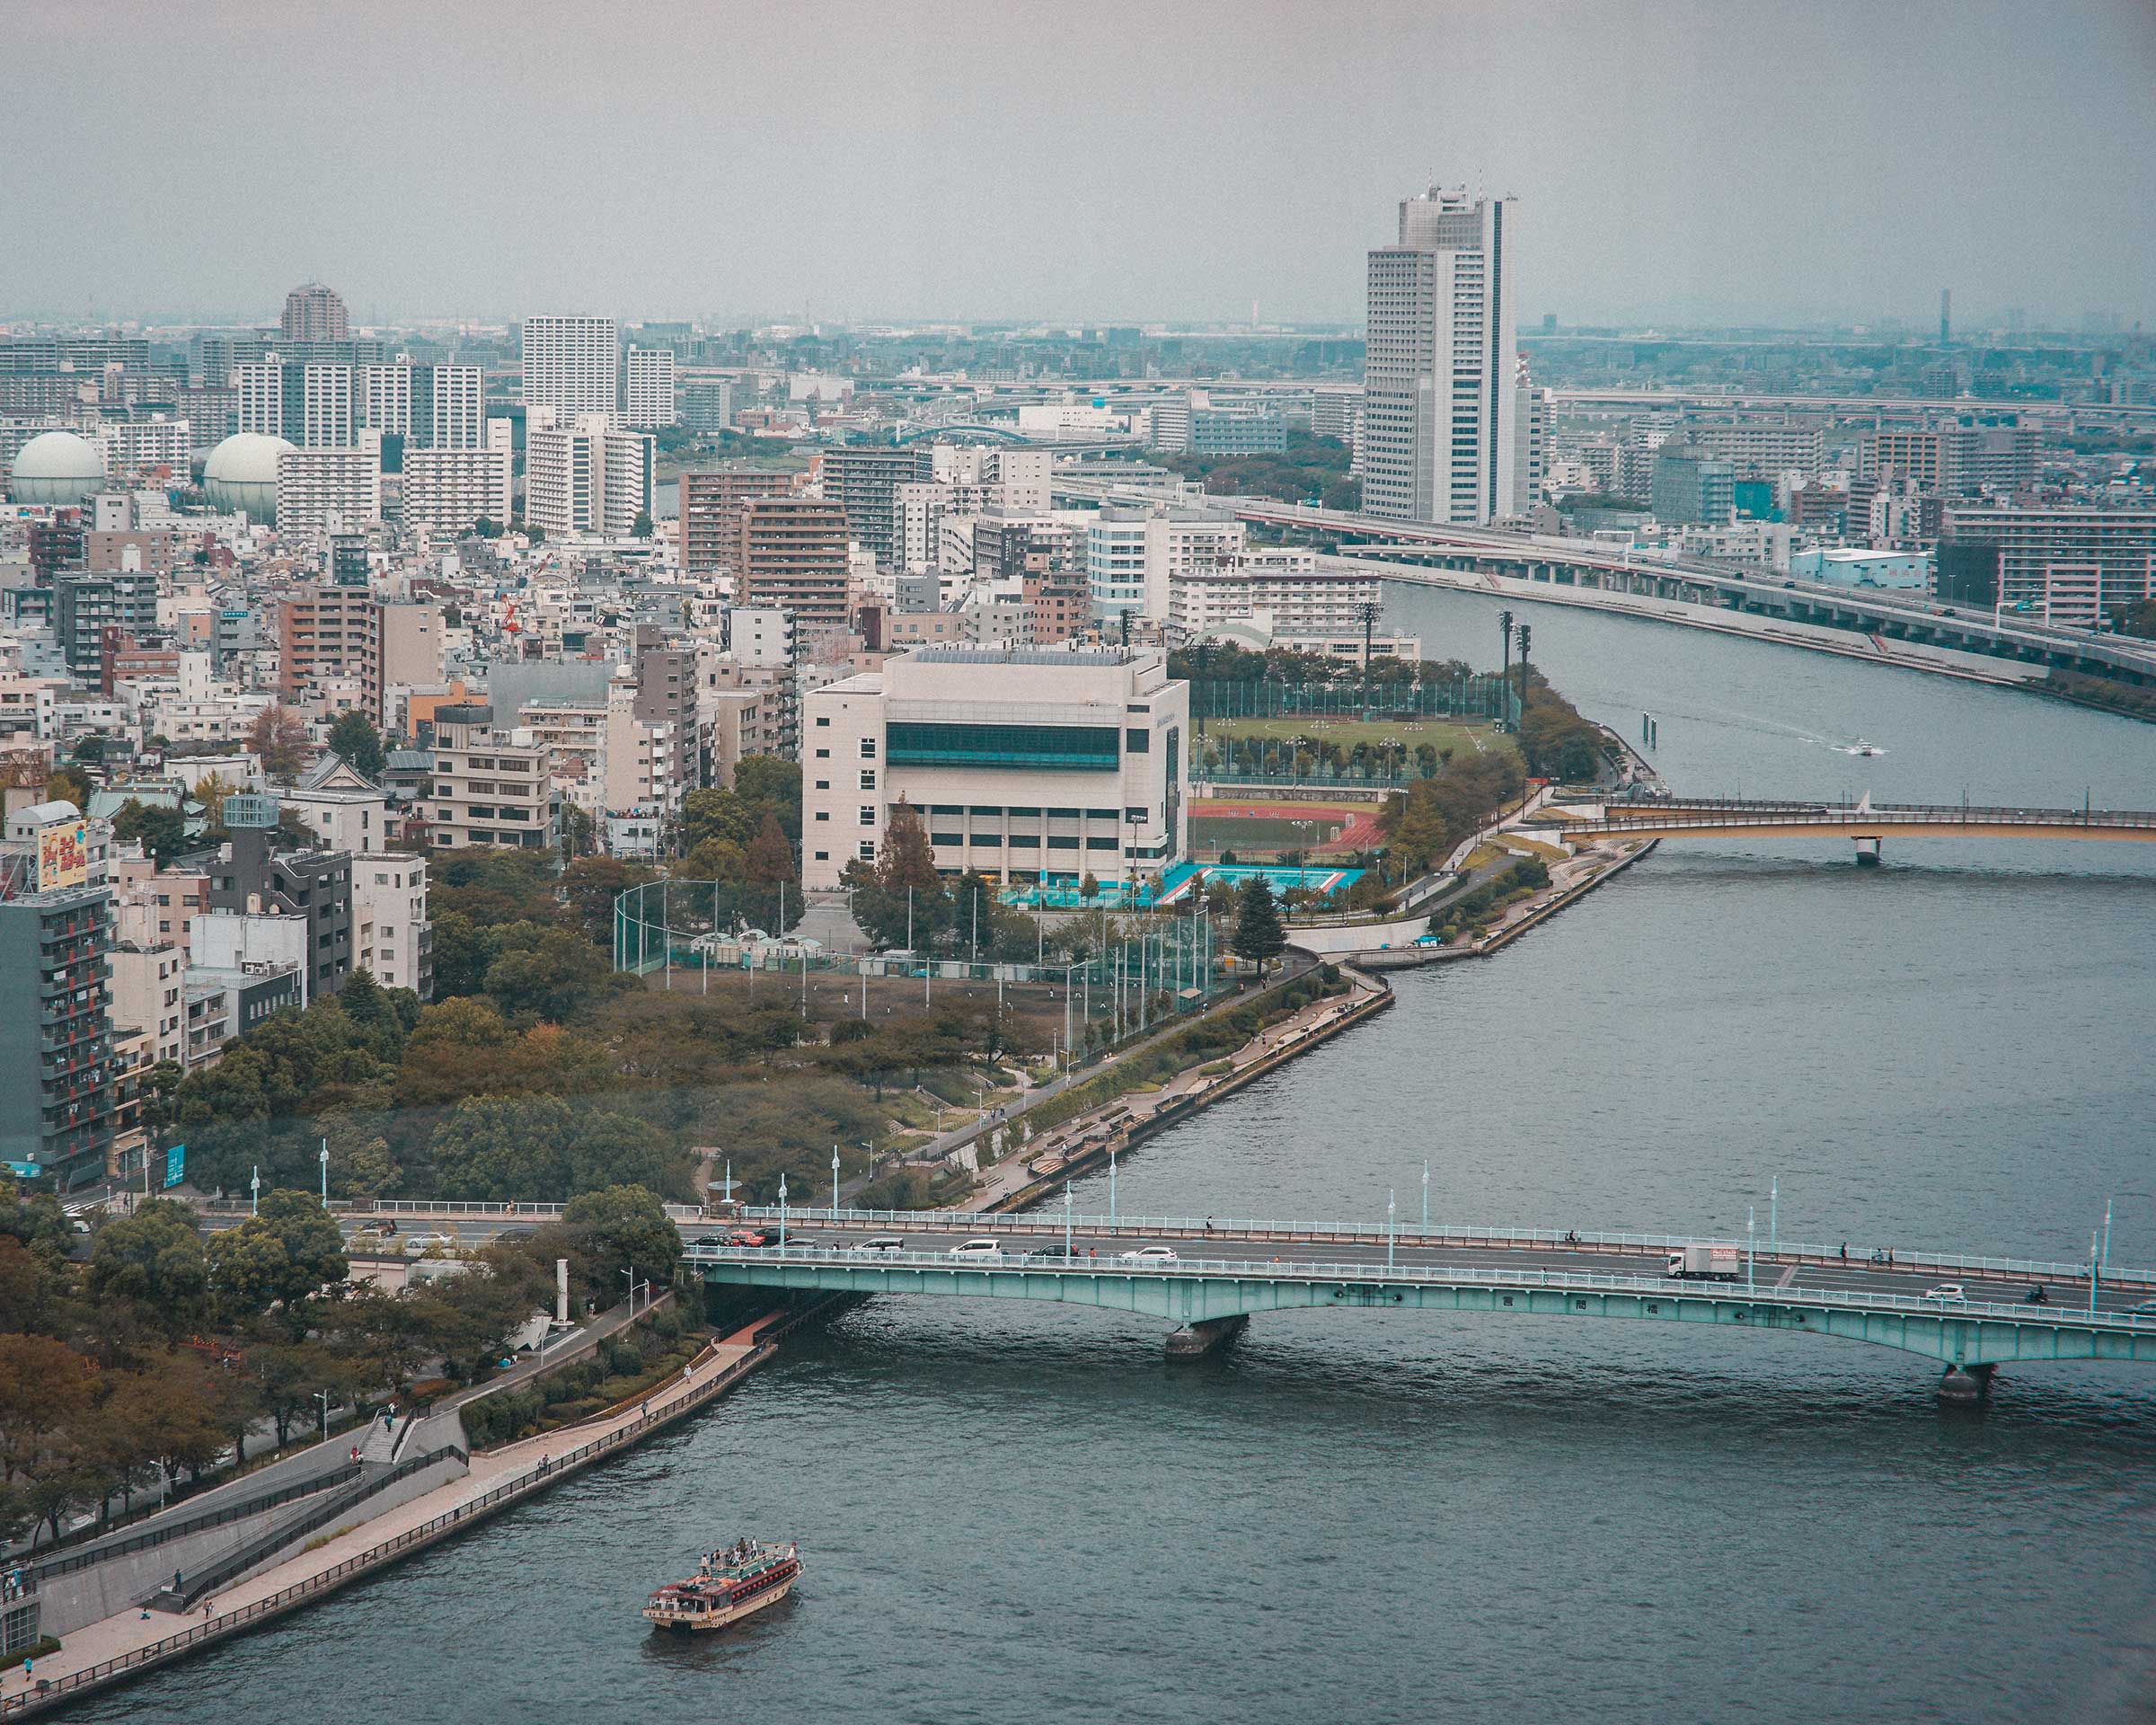 Overlooking Sumida River and the city